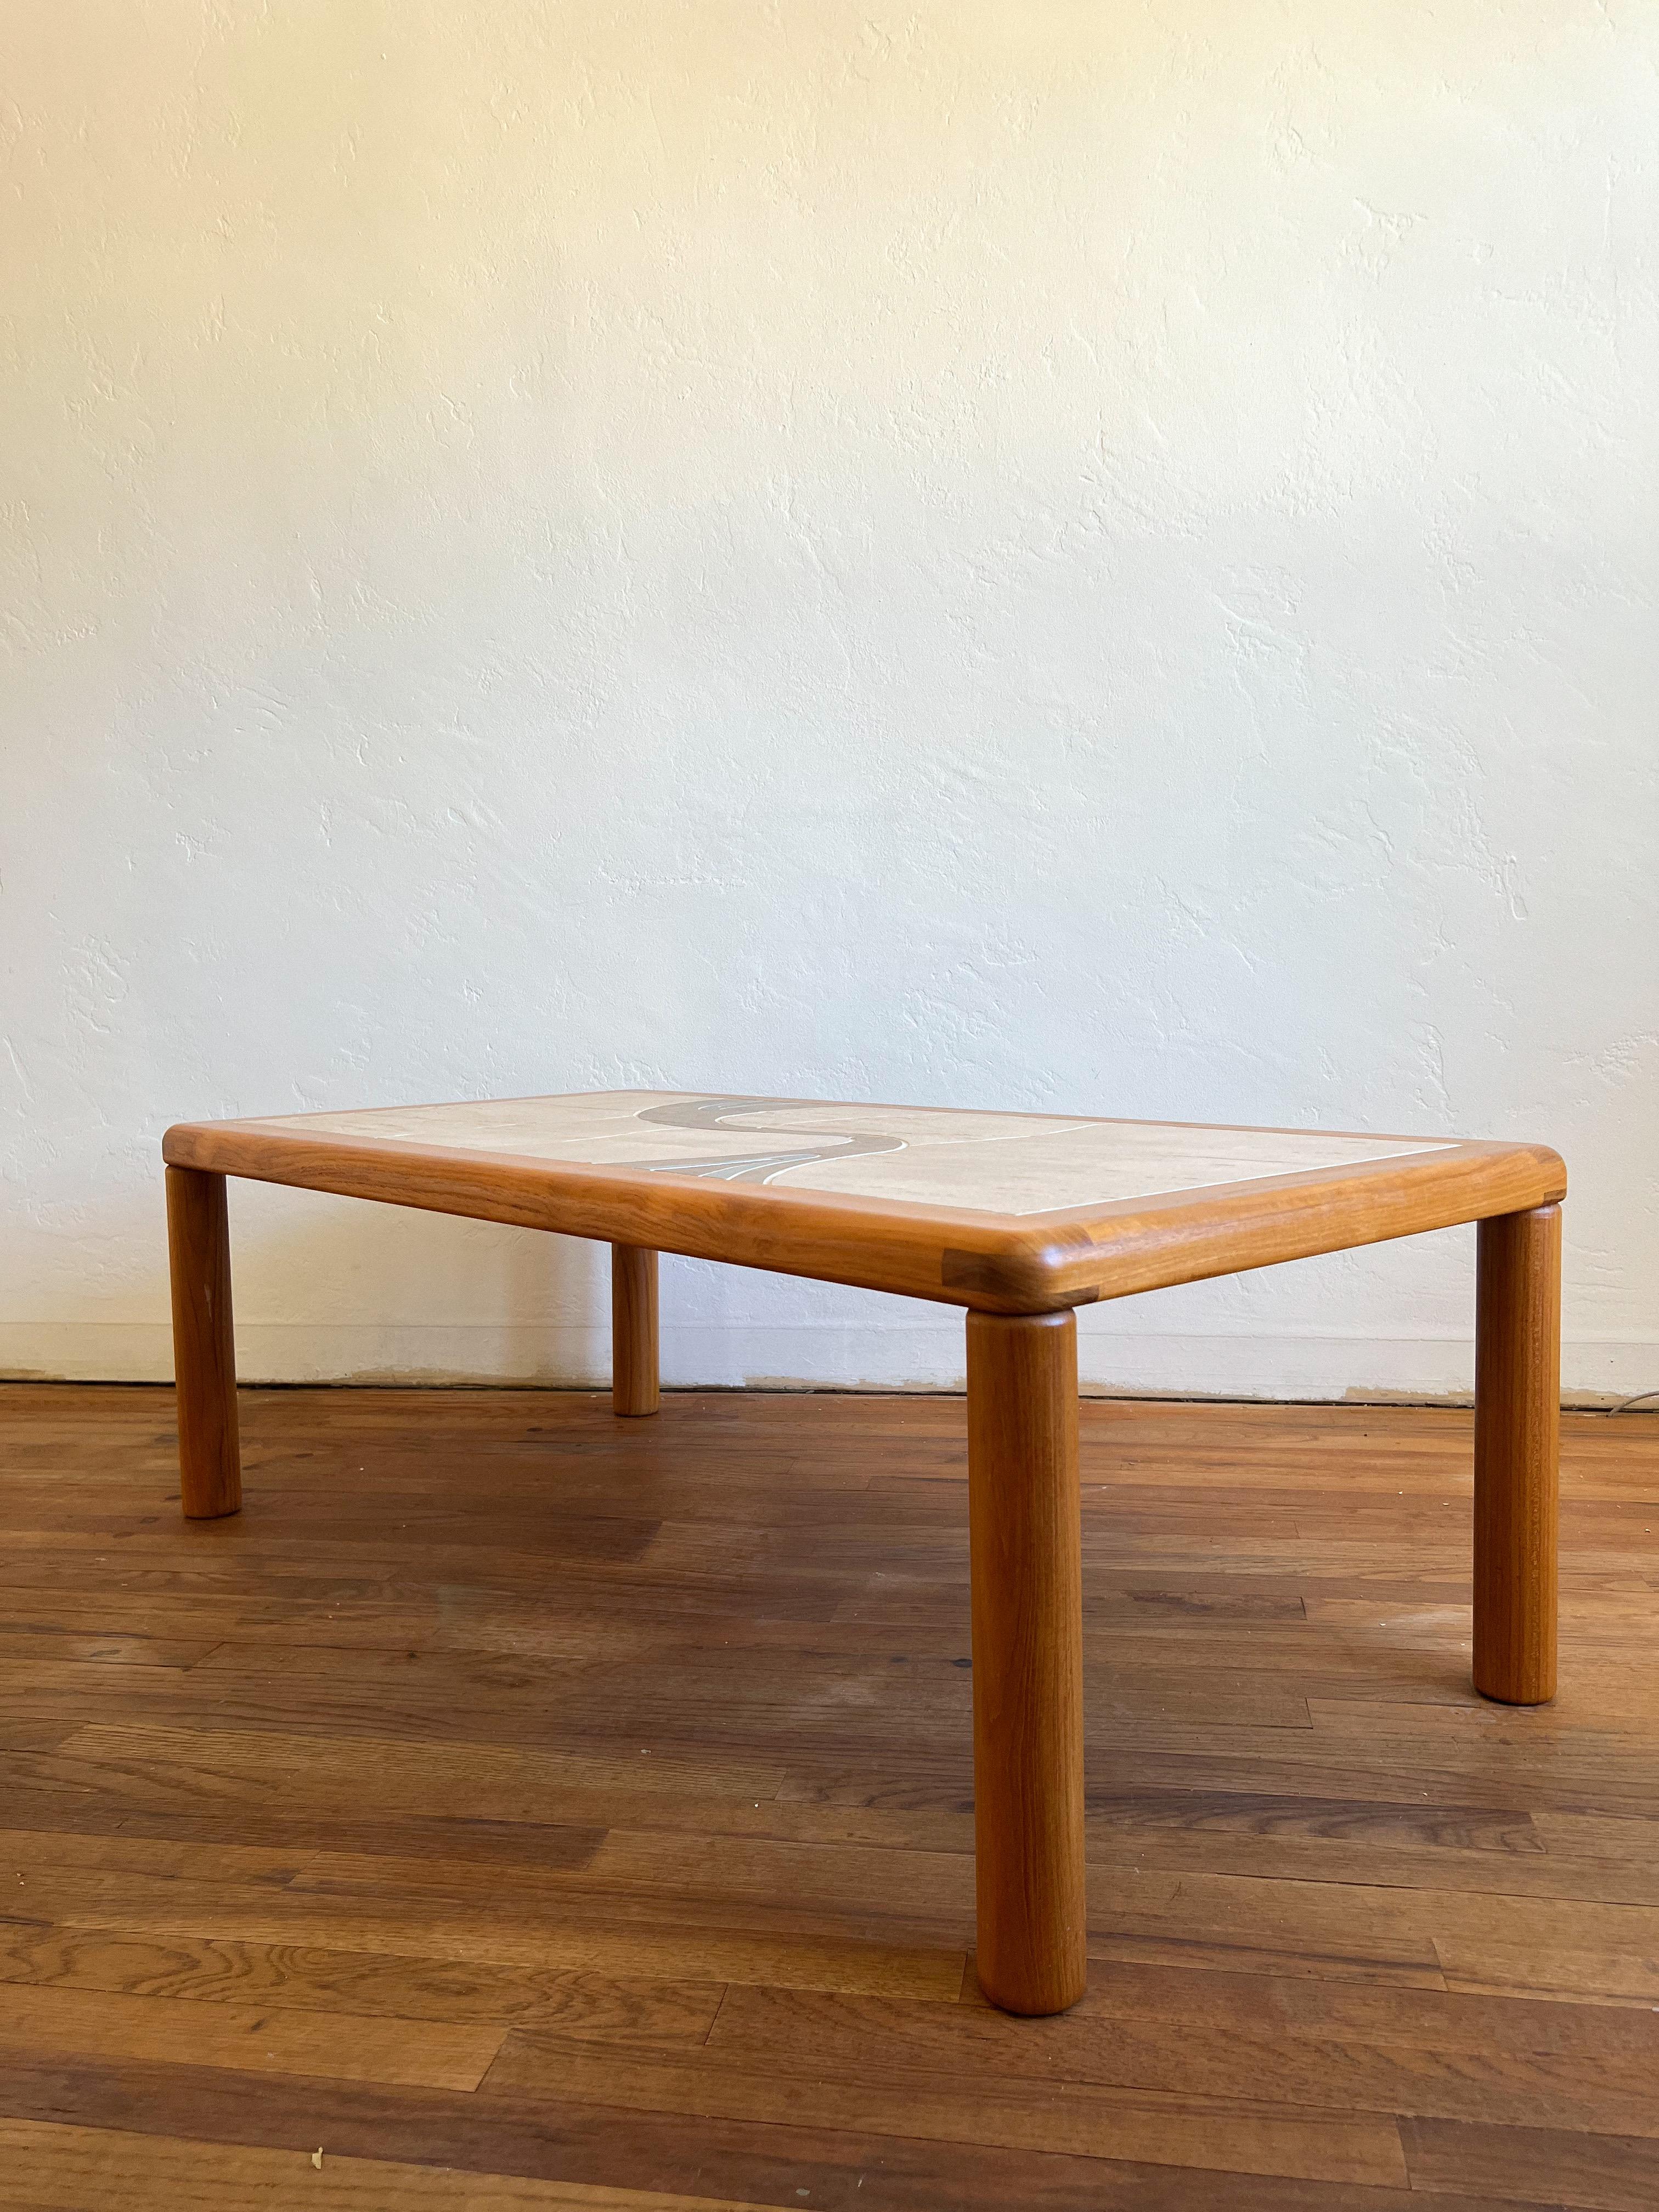 Tue Poulsen for Haslev Møbelsnedkeri, Ceramic Tiled Teak Coffee Table In Good Condition For Sale In La Mesa, CA